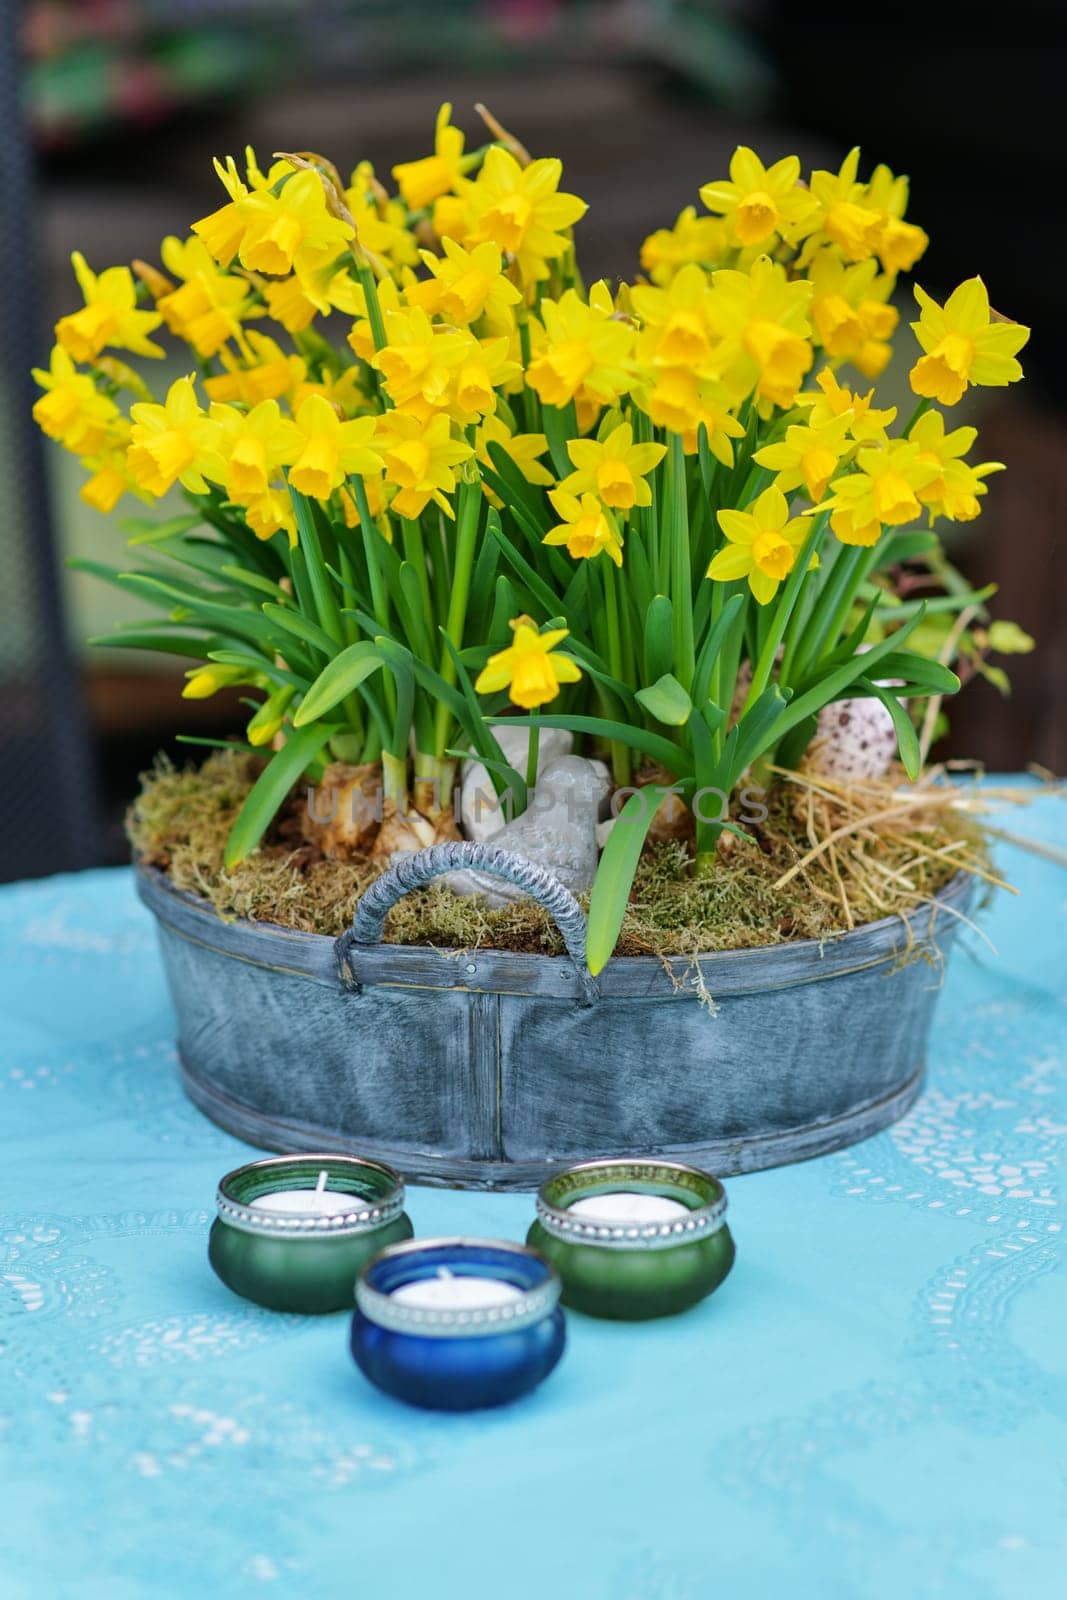 Daffodils in a large pot and candles for Easter by Godi